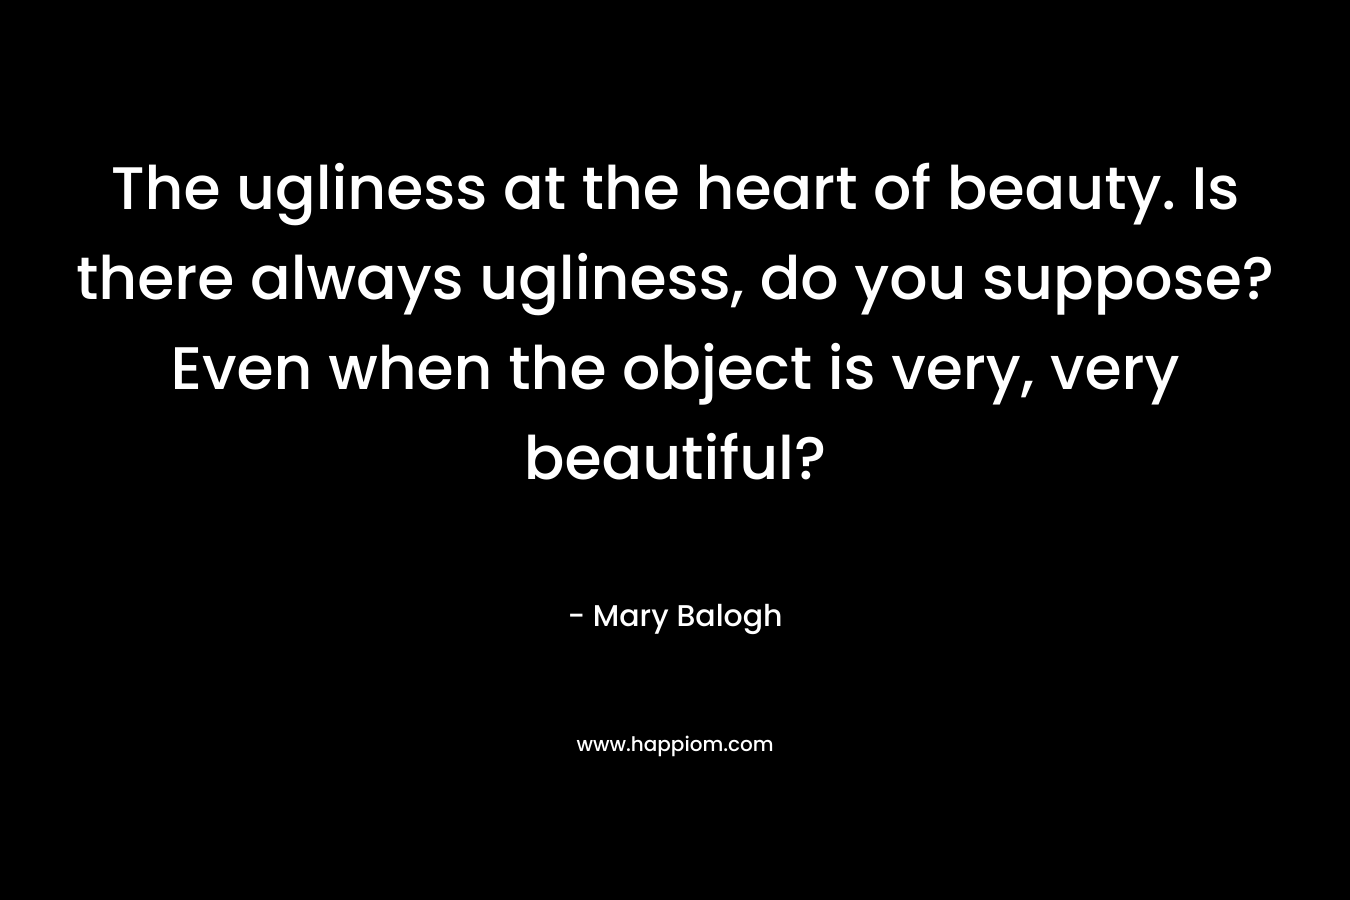 The ugliness at the heart of beauty. Is there always ugliness, do you suppose? Even when the object is very, very beautiful? – Mary Balogh